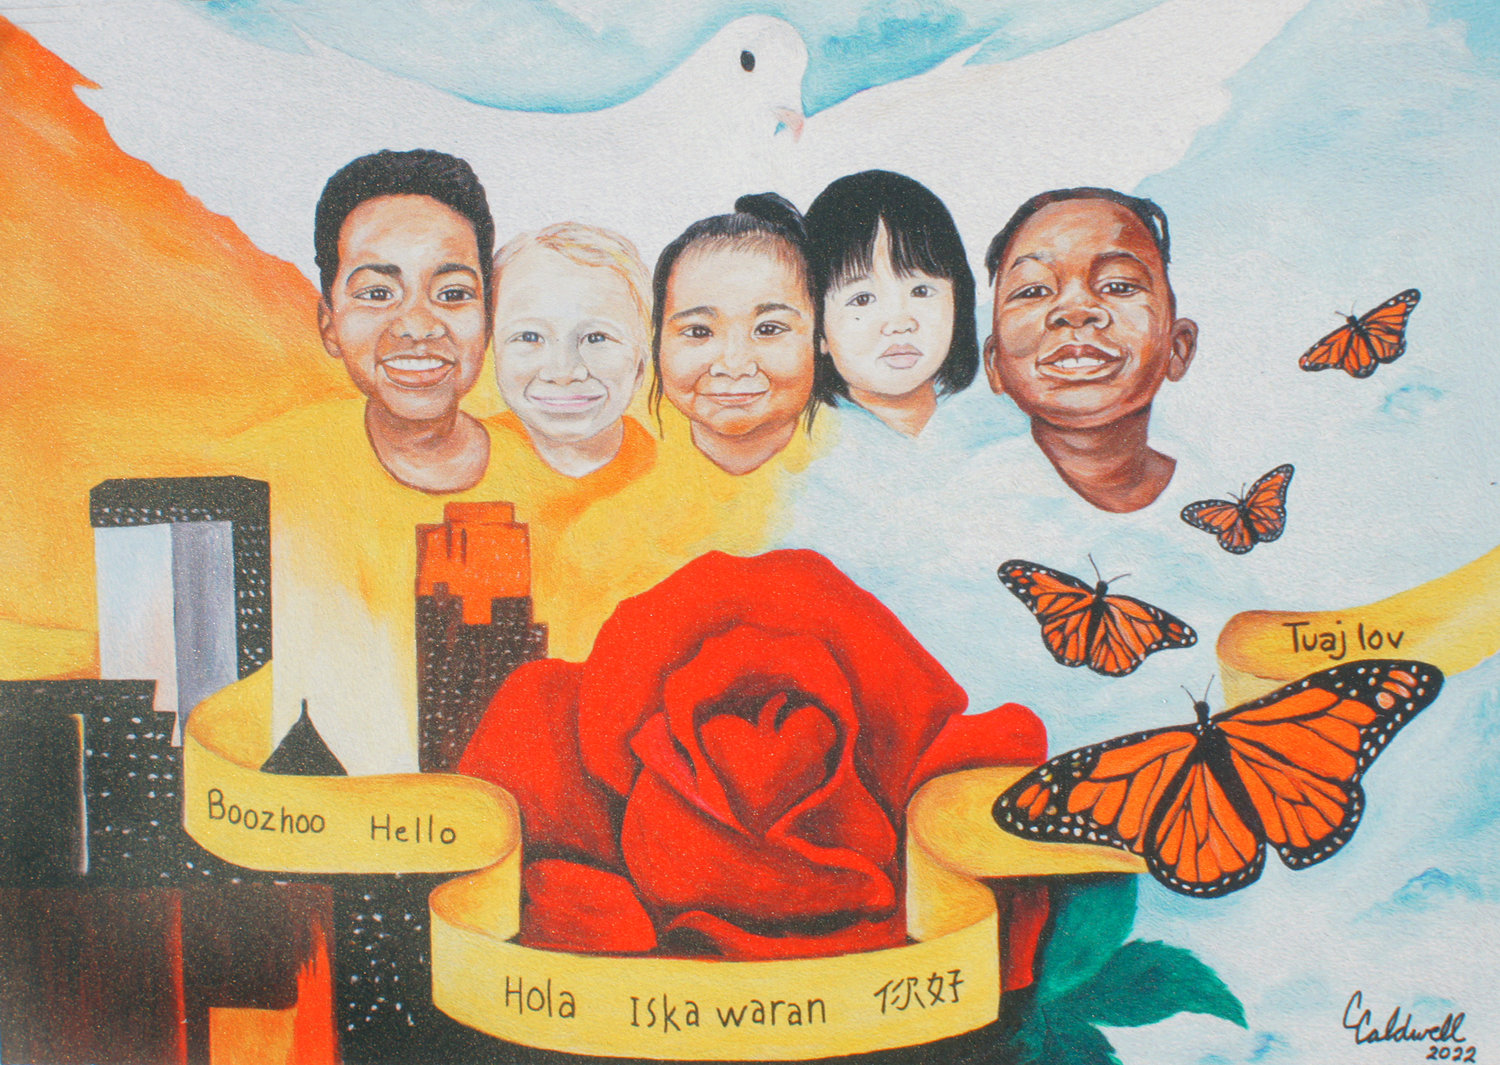 "Set against the city skyline, the mural celebrates the cultural diversity of South Minneapolis and includes symbols of Peace (dove), Hope (children), and Transformation (butterfly). A yellow ribbon offers a greeting in six languages: Ojibwe, English, Spanish, Somali, Chinese, and Hmong." (Photo by Terry Faust)